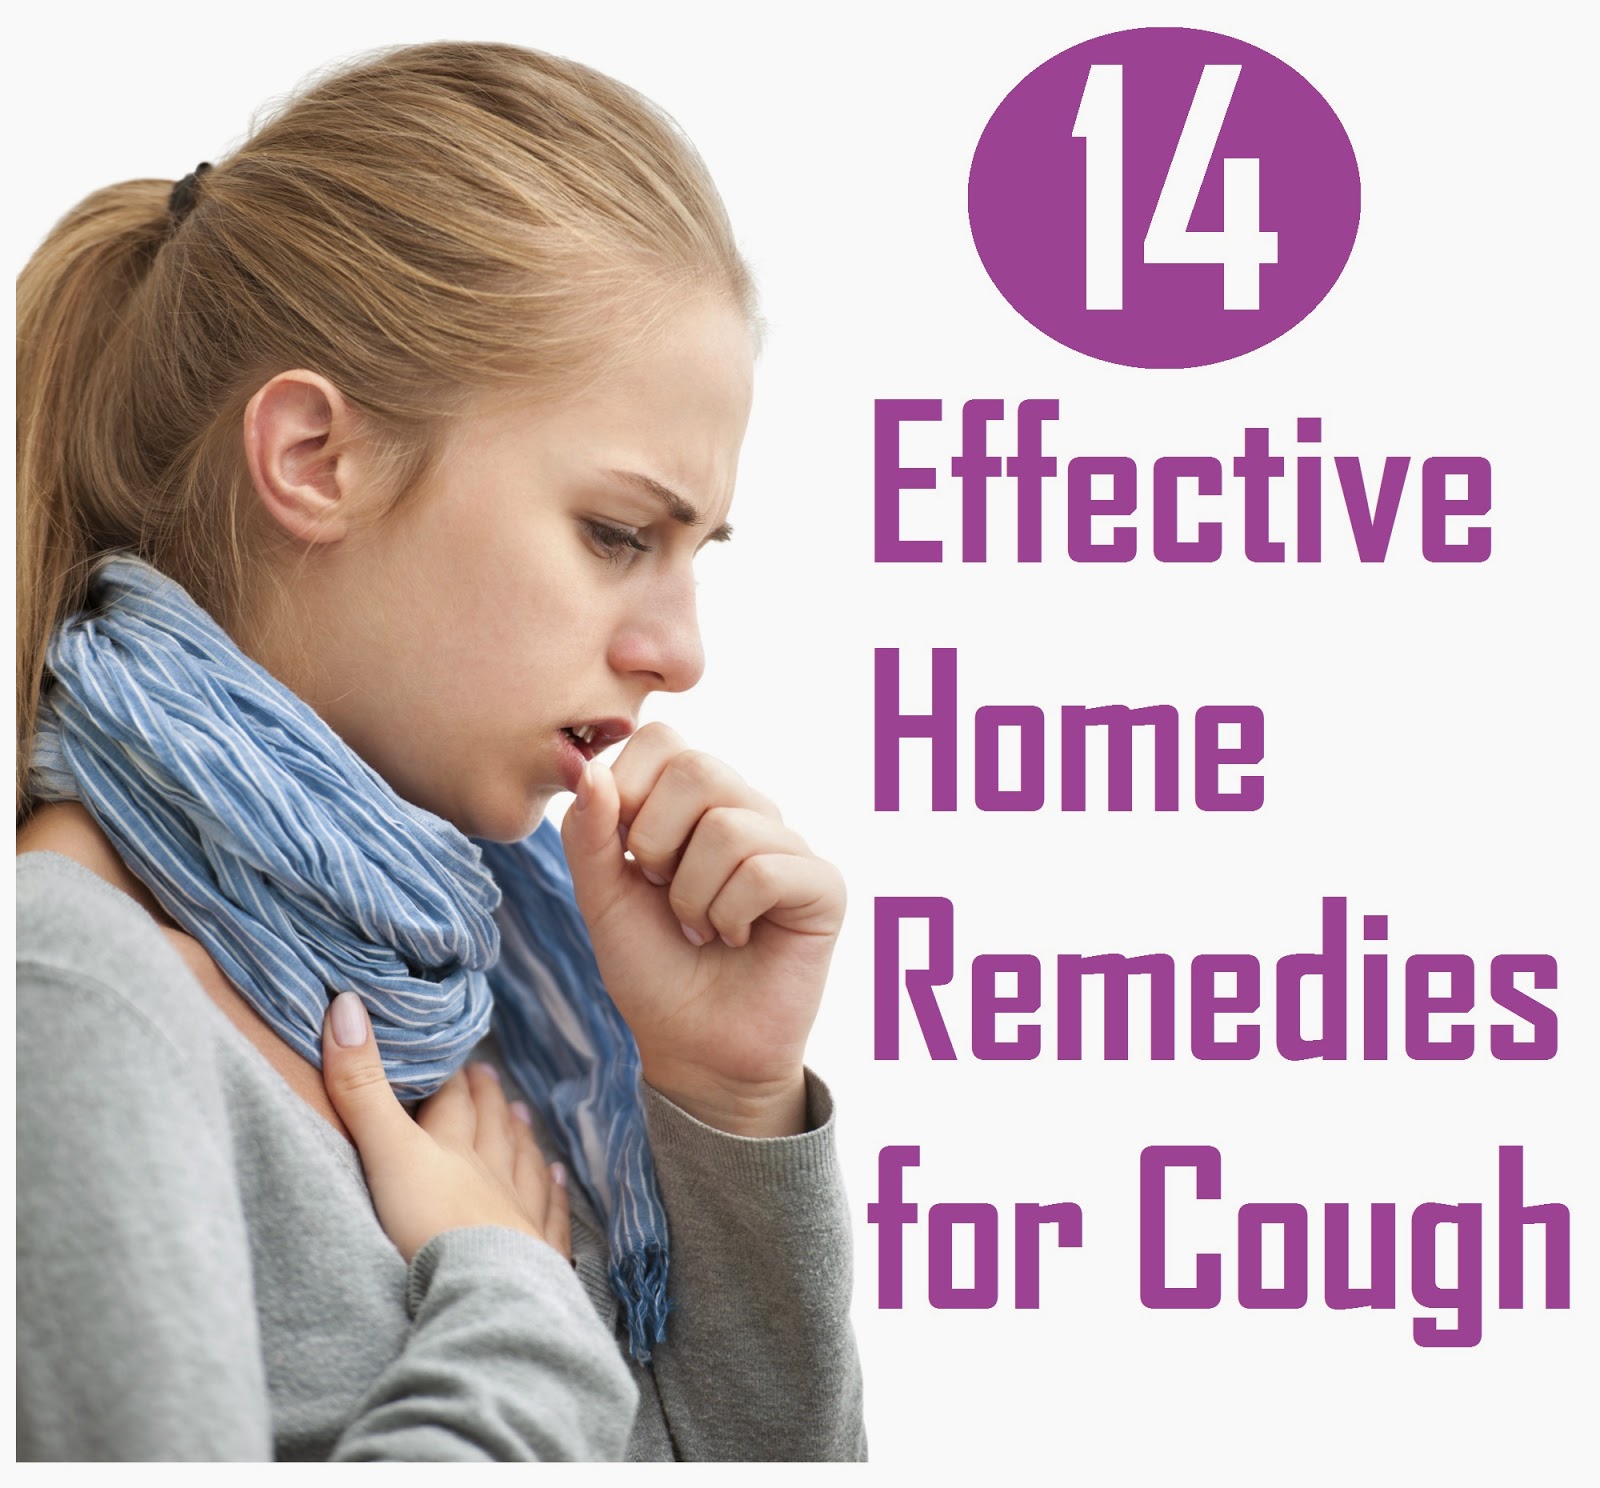 14 Effective Home Remedies For Cough Skinnyzine